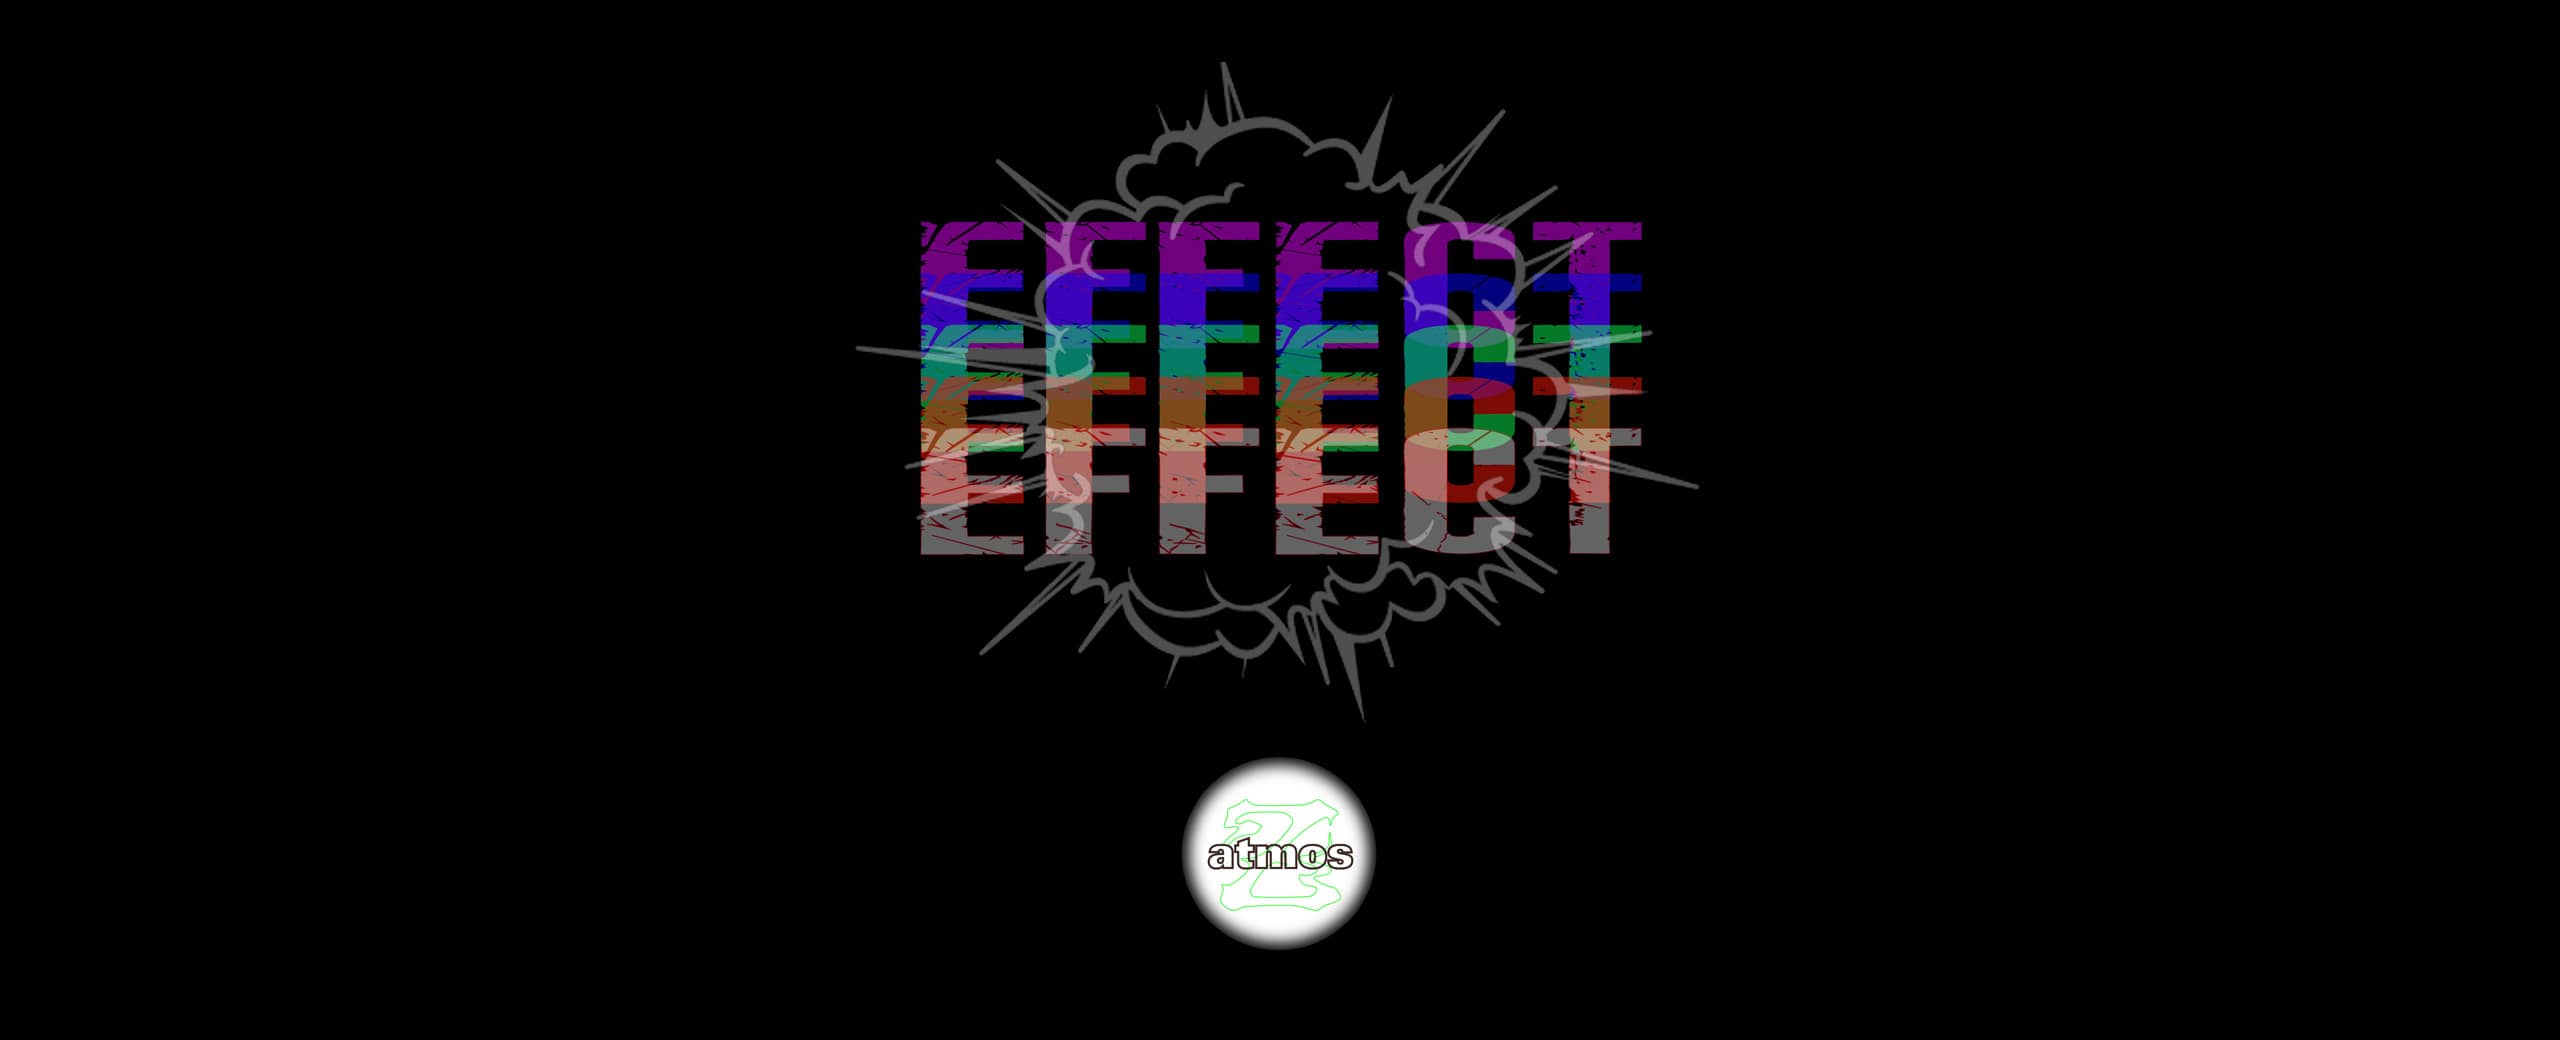 zigame 10th anniversary “EFFECT”